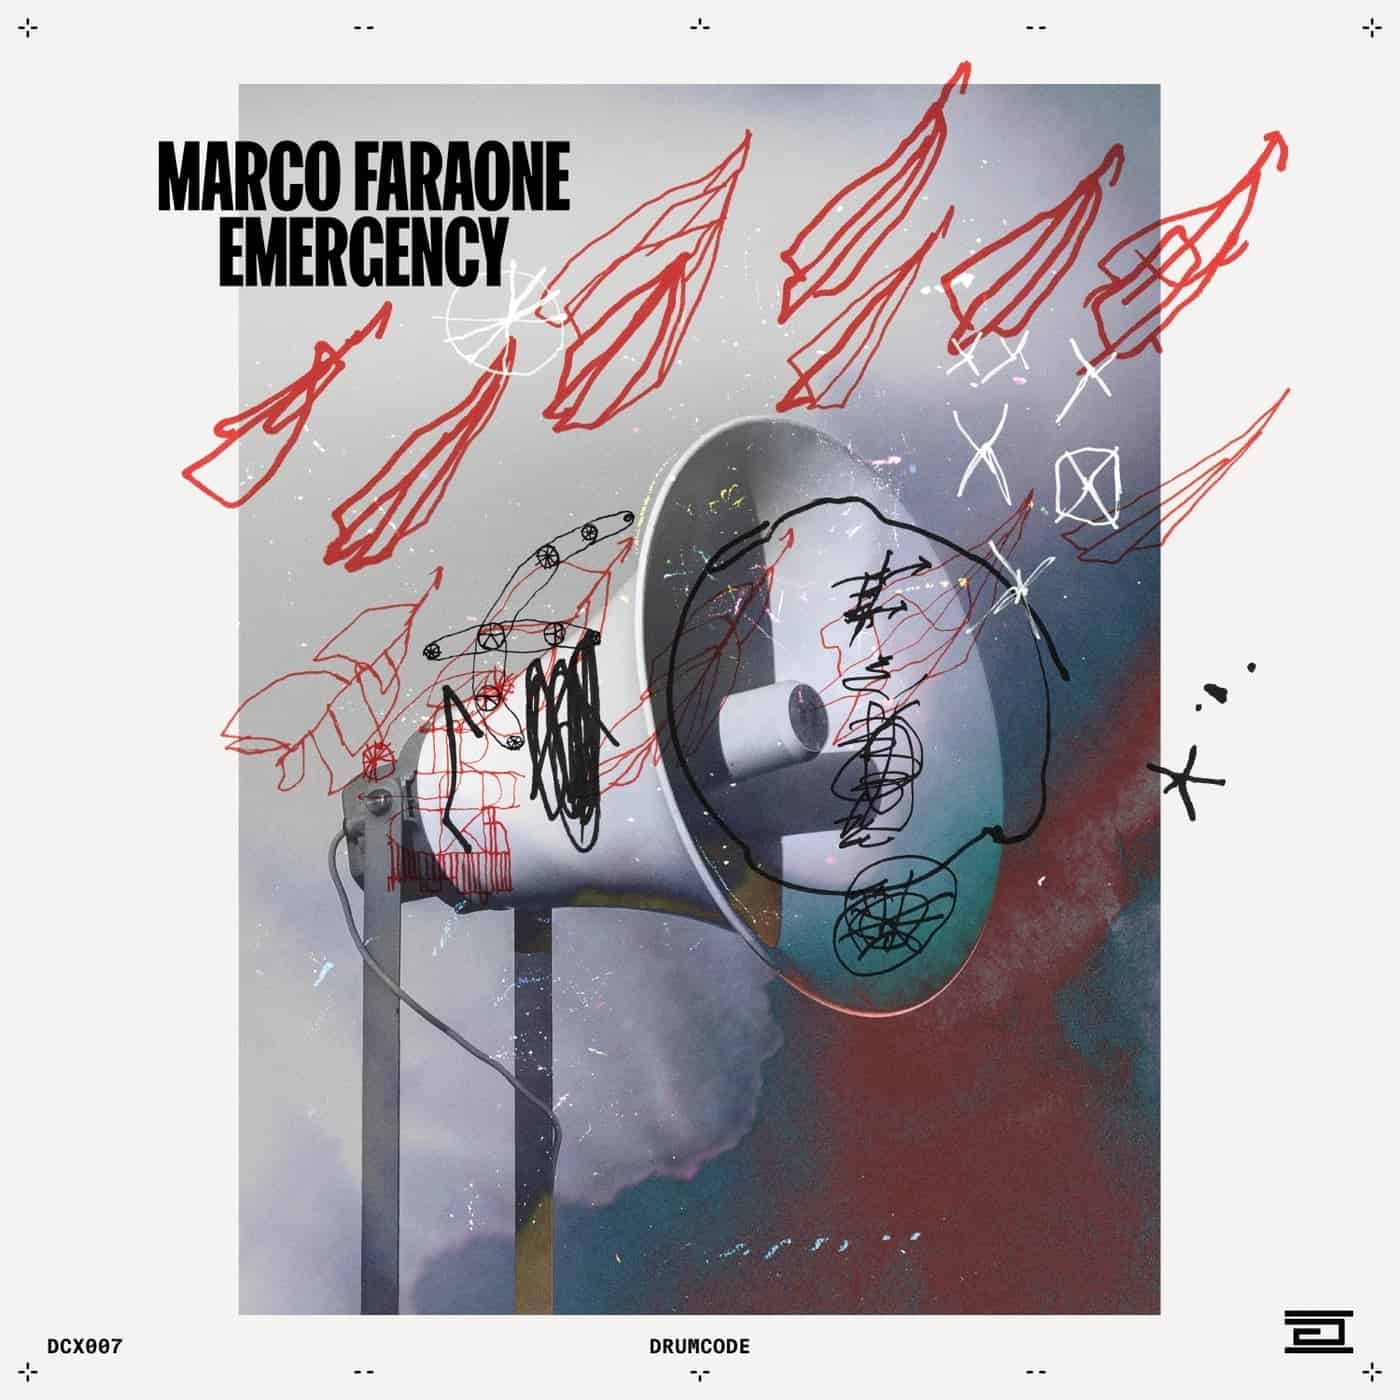 image cover: Emergency by Marco Faraone on Drumcode